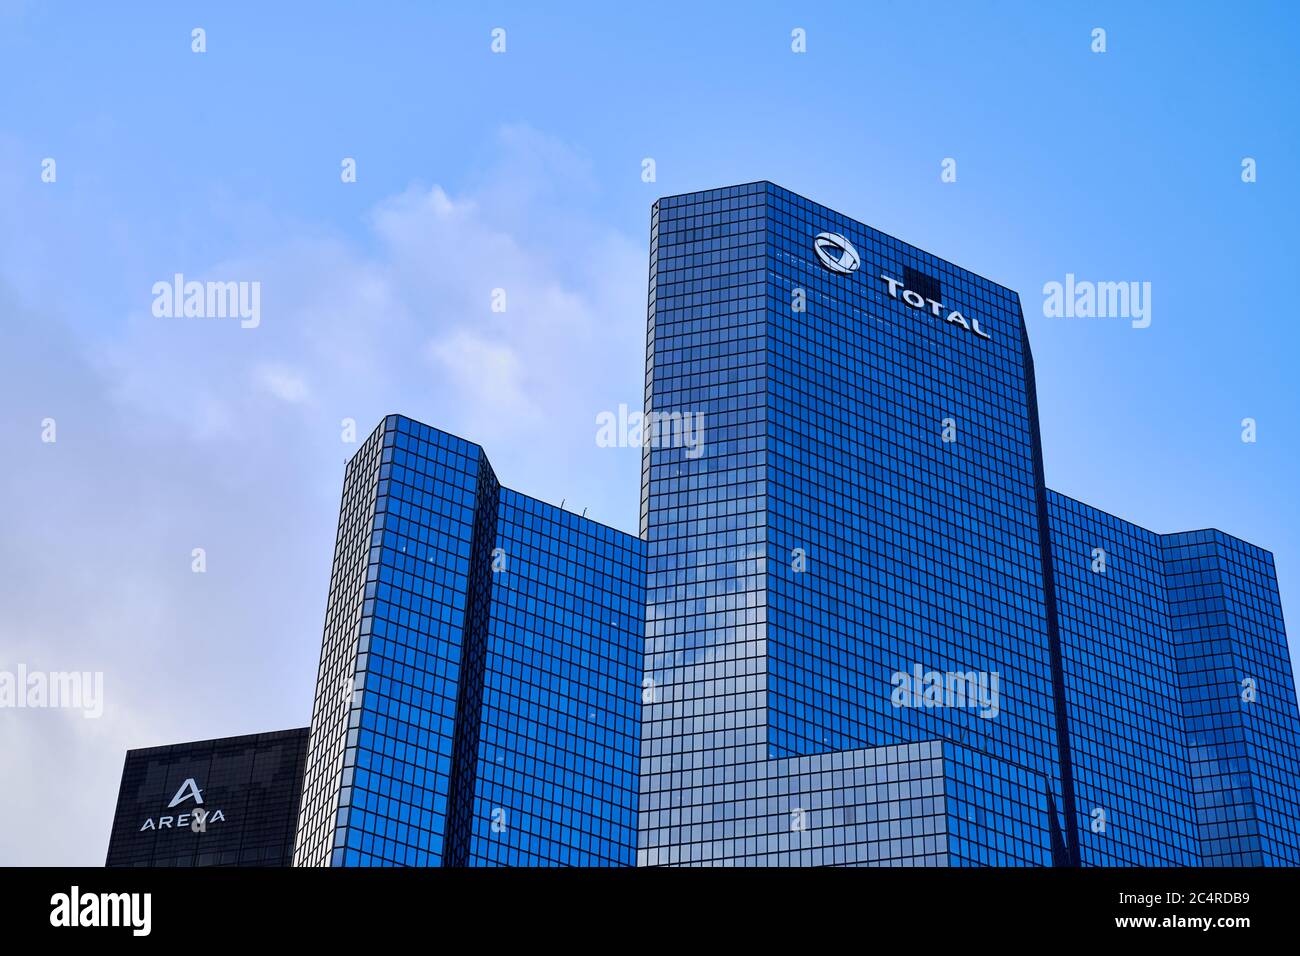 TOTAL headquarters, skyscrapers and office buildings in La Defense business district, Paris Stock Photo